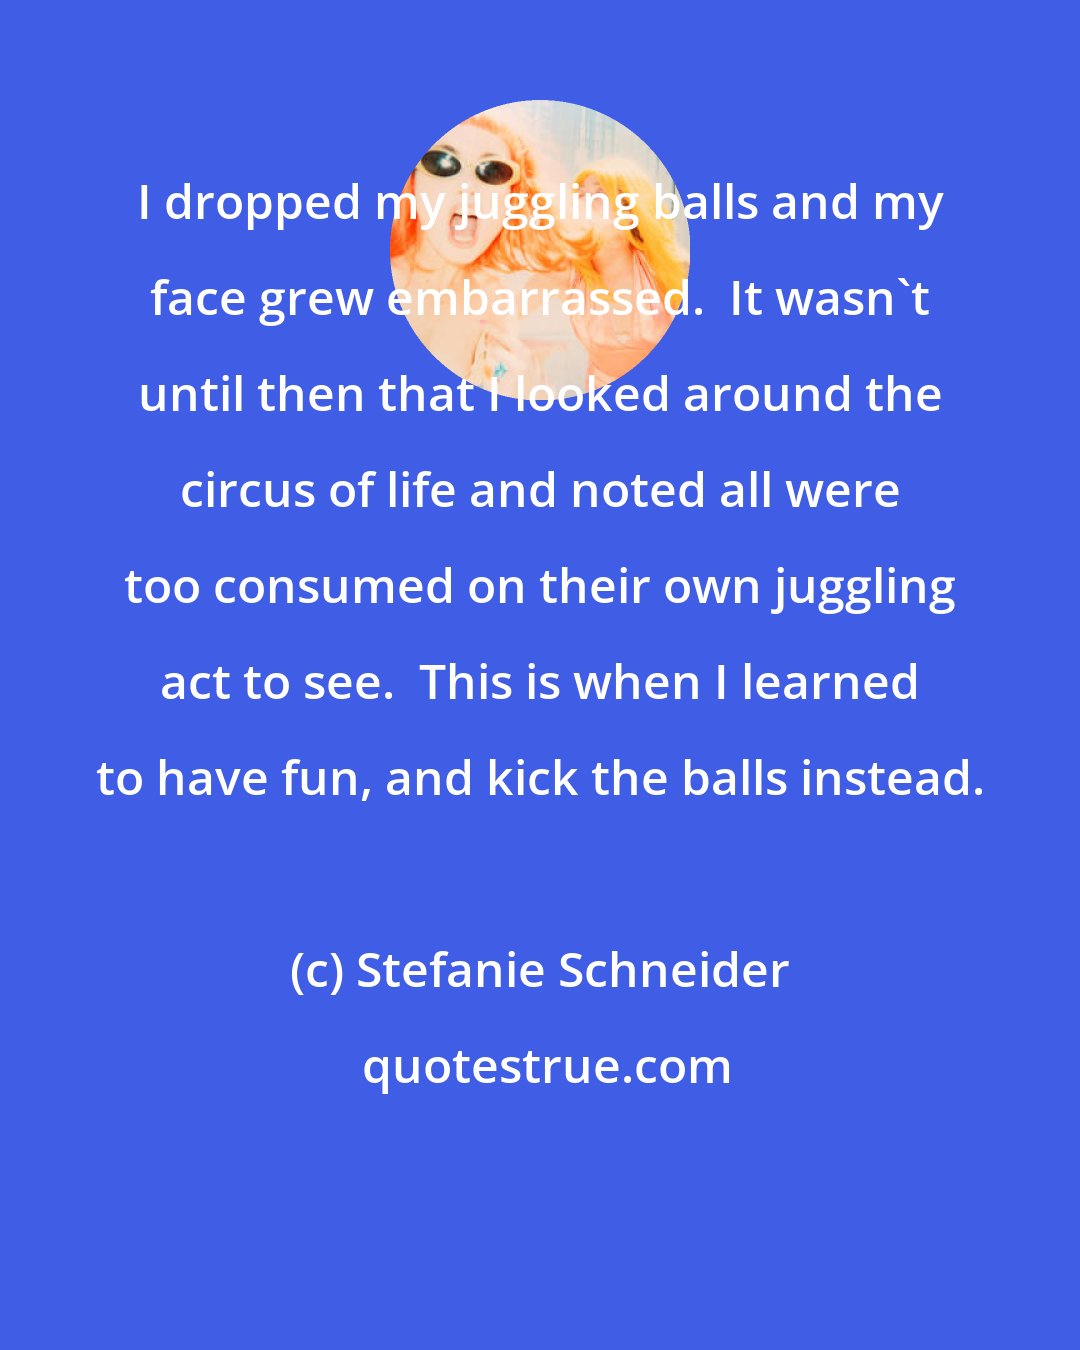 Stefanie Schneider: I dropped my juggling balls and my face grew embarrassed.  It wasn't until then that I looked around the circus of life and noted all were too consumed on their own juggling act to see.  This is when I learned to have fun, and kick the balls instead.